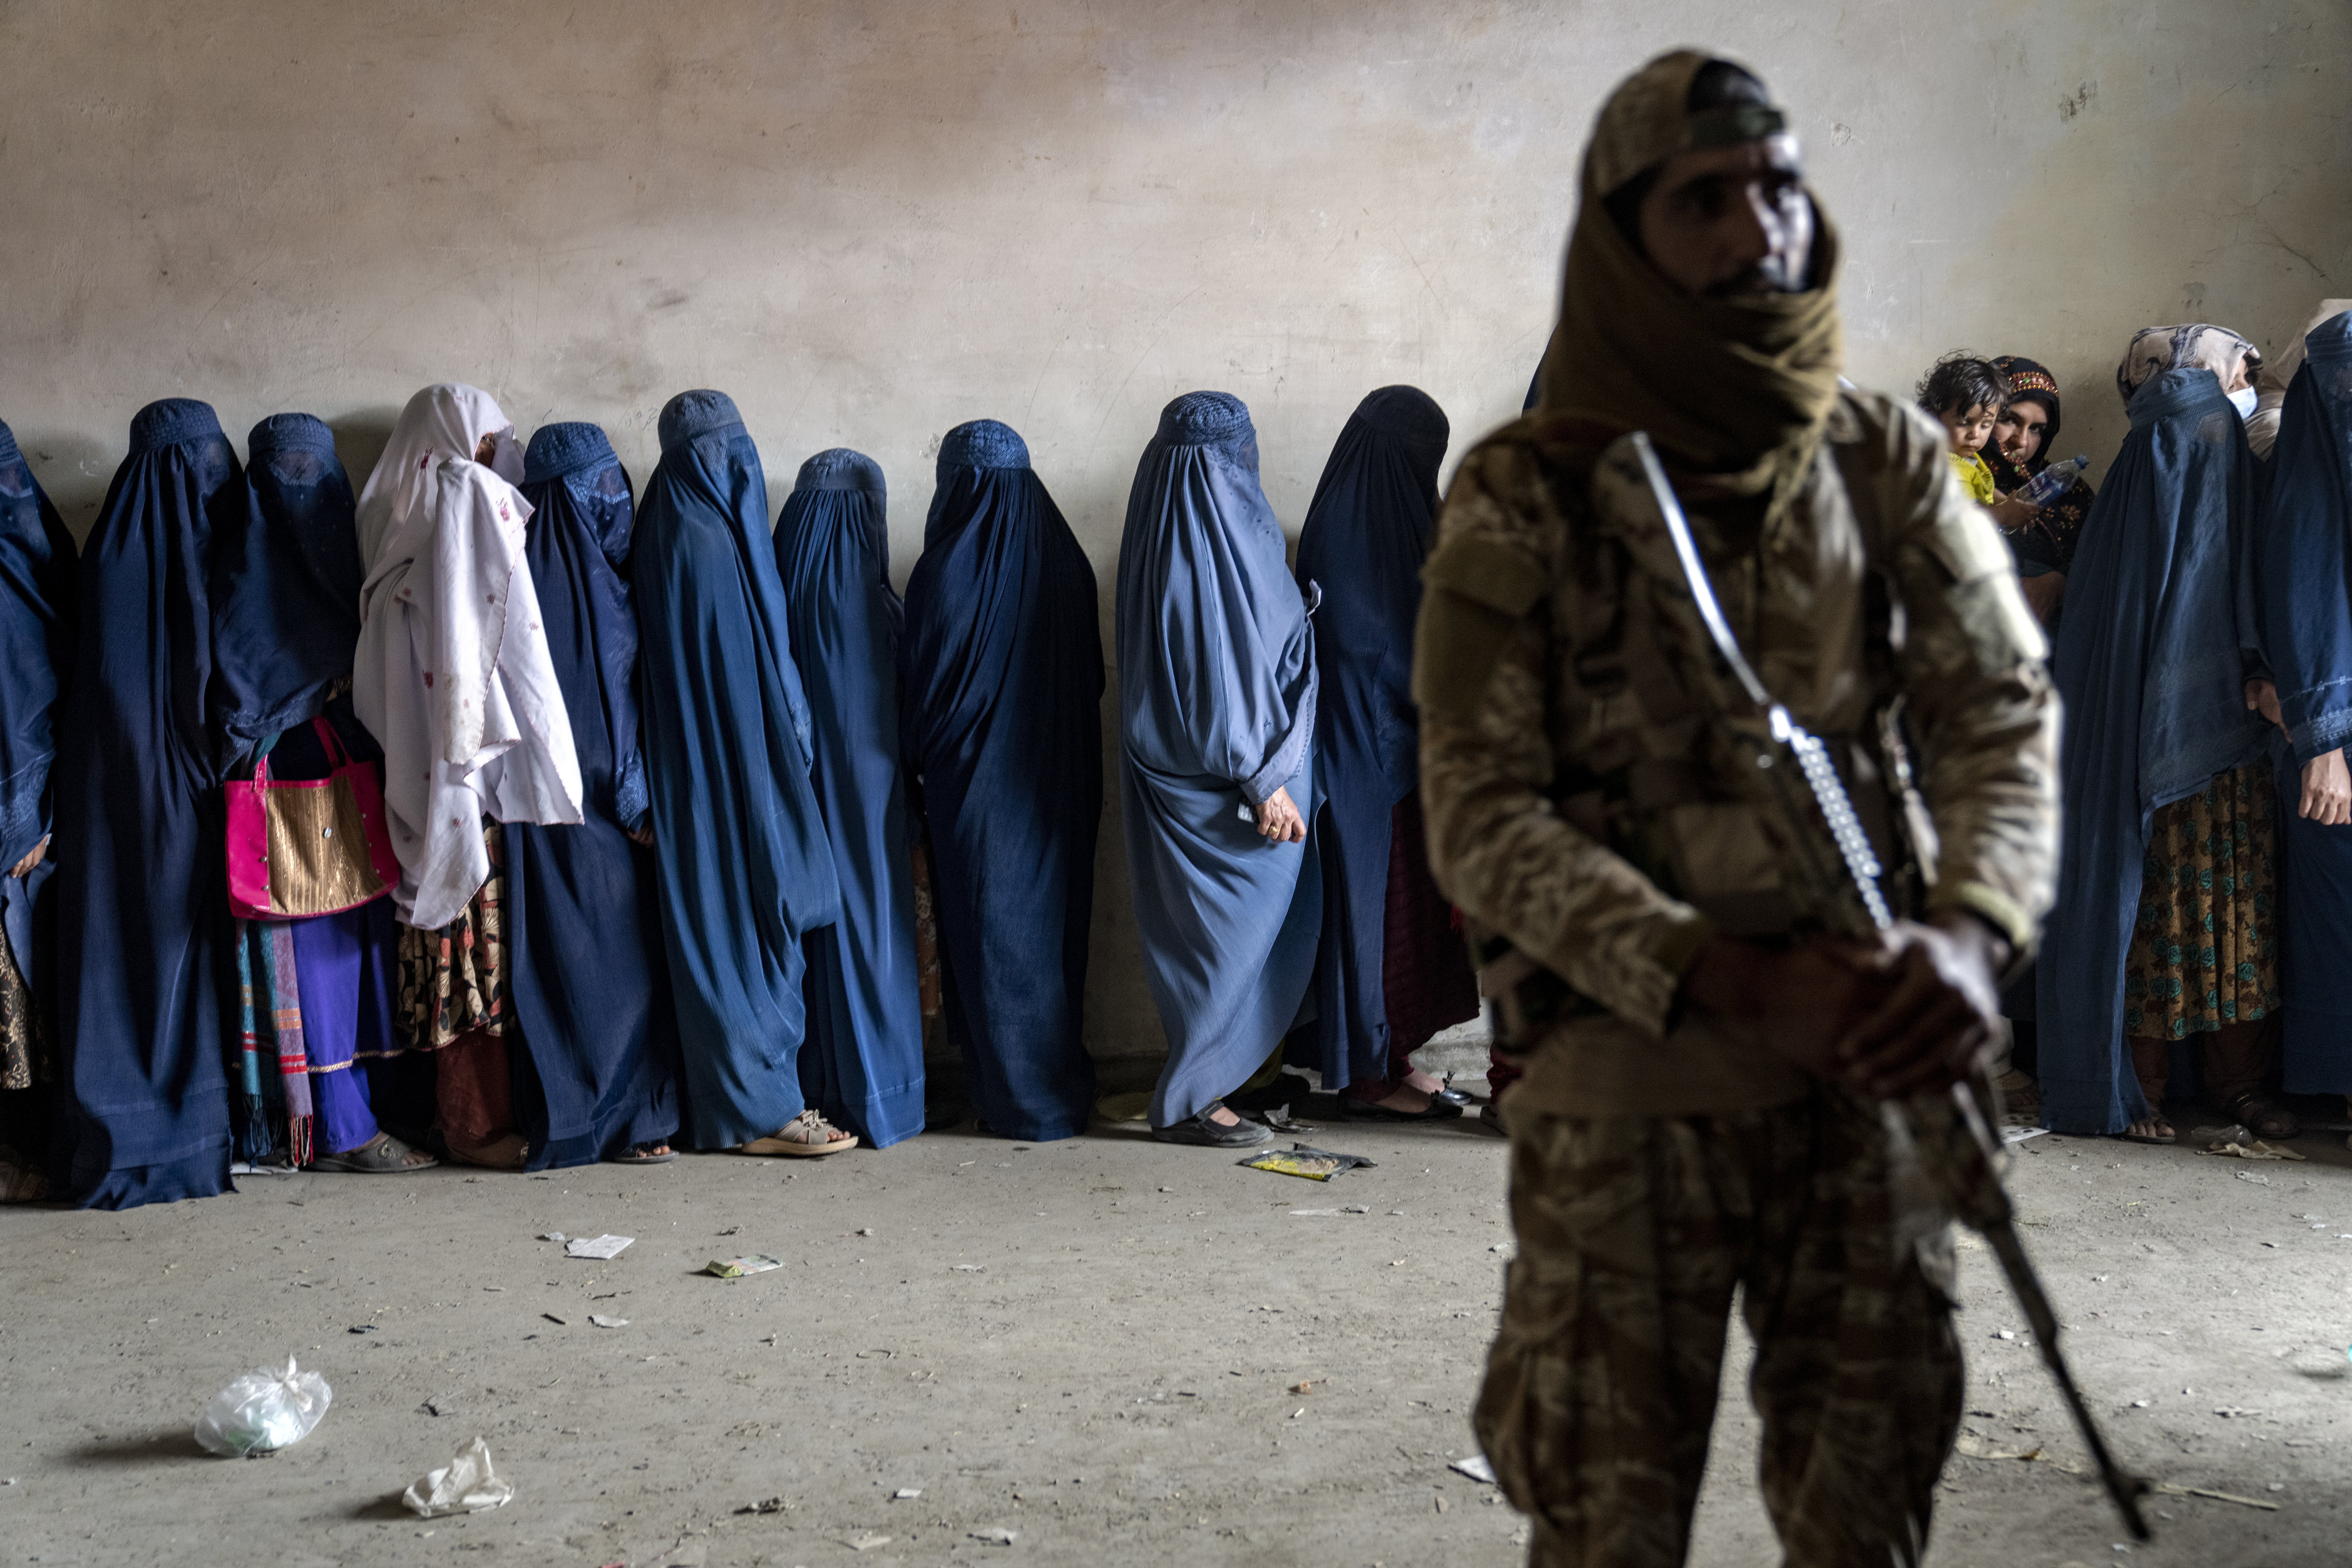 A Taliban fighter stands guard as women wait to receive food rations distributed by a humanitarian aid group in Kabul, Afghanistan, on May 23. Photo: AP